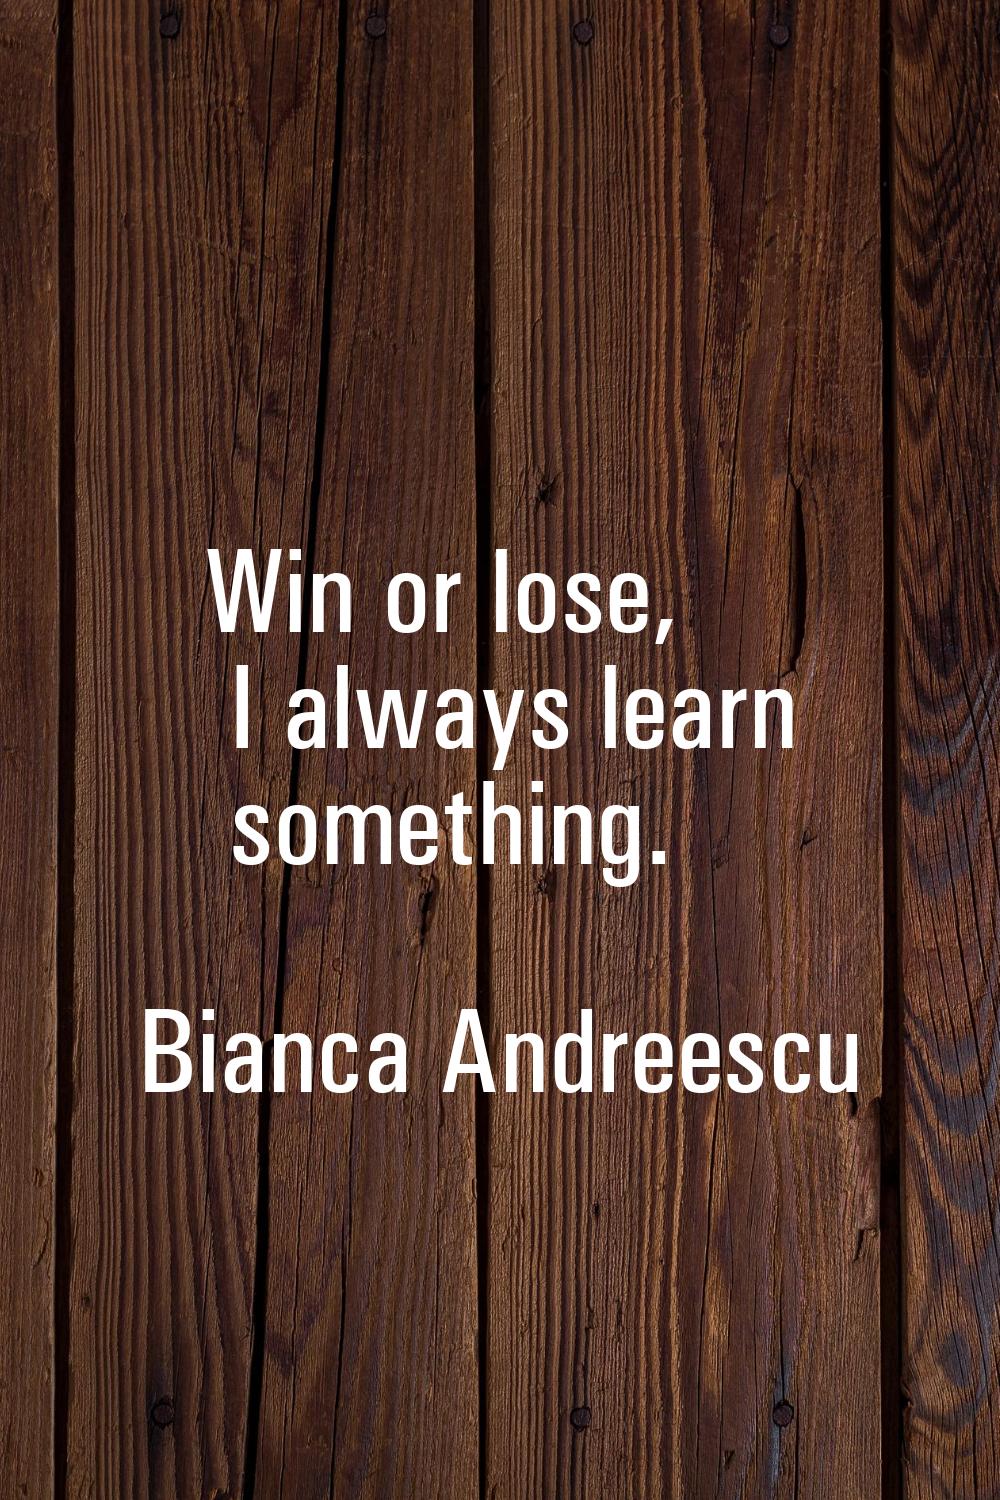 Win or lose, I always learn something.